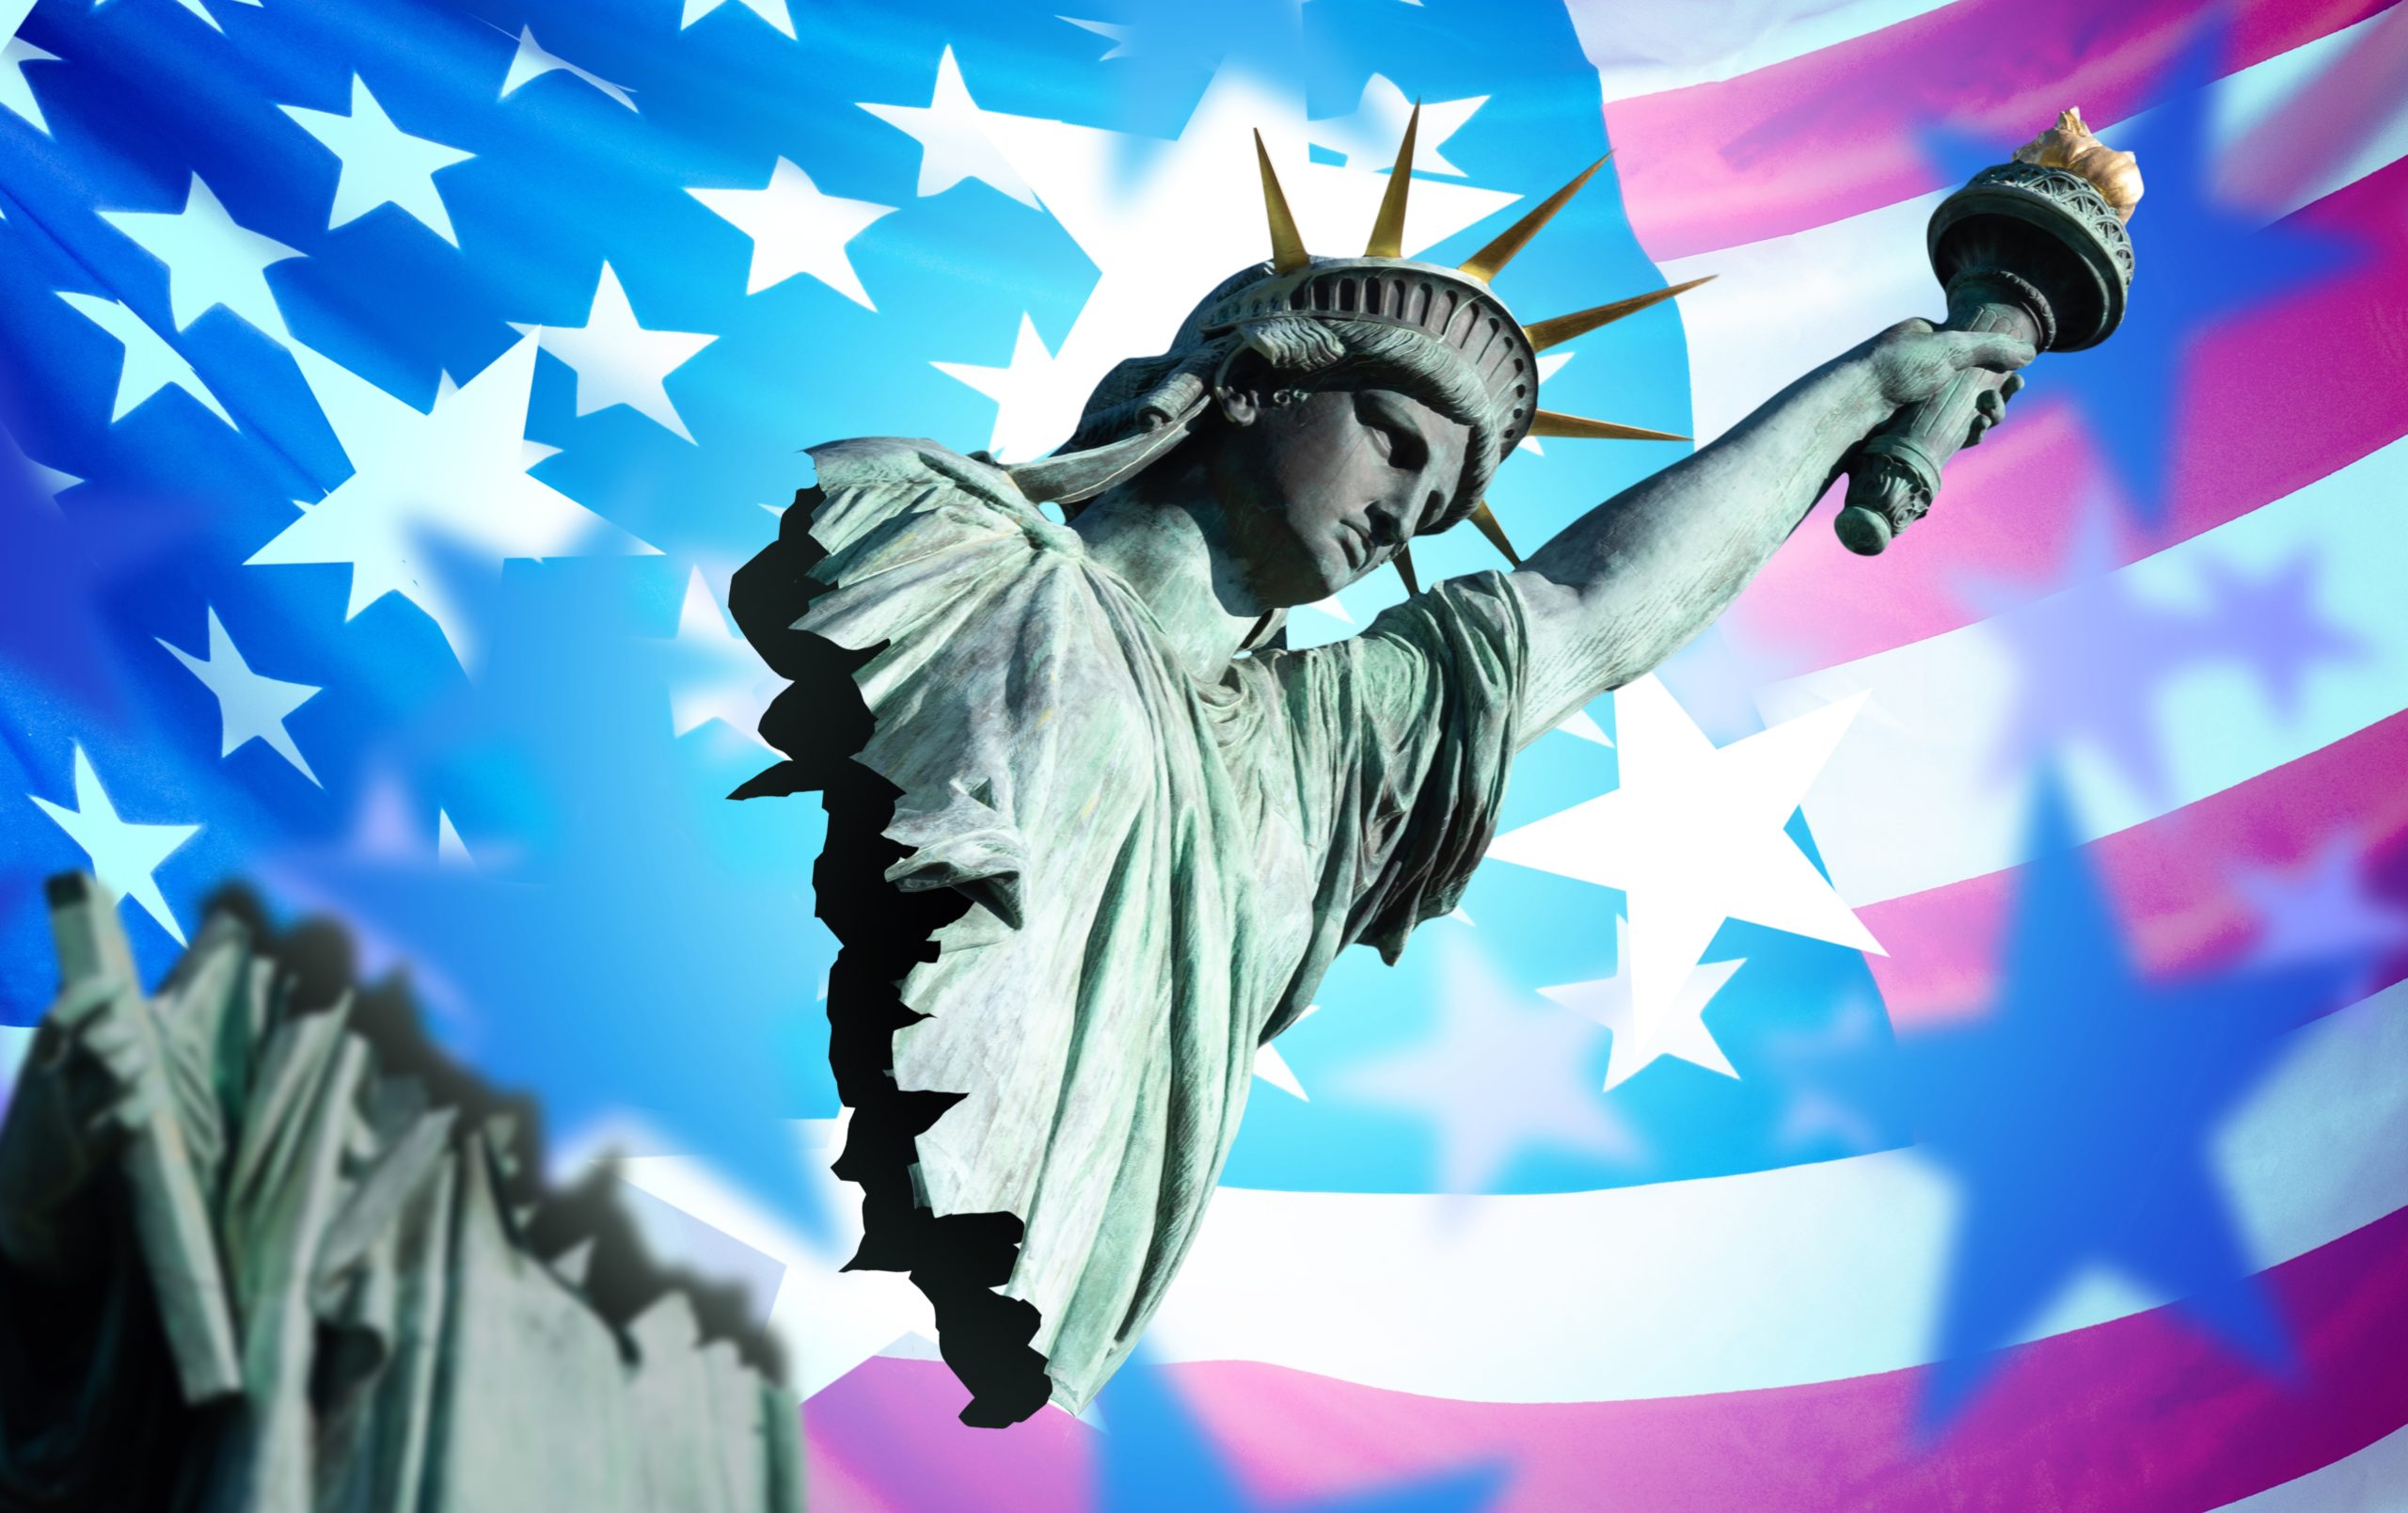 Statue,Of,Liberty,On,Background,Of,Us,Flag.,Split,Statue